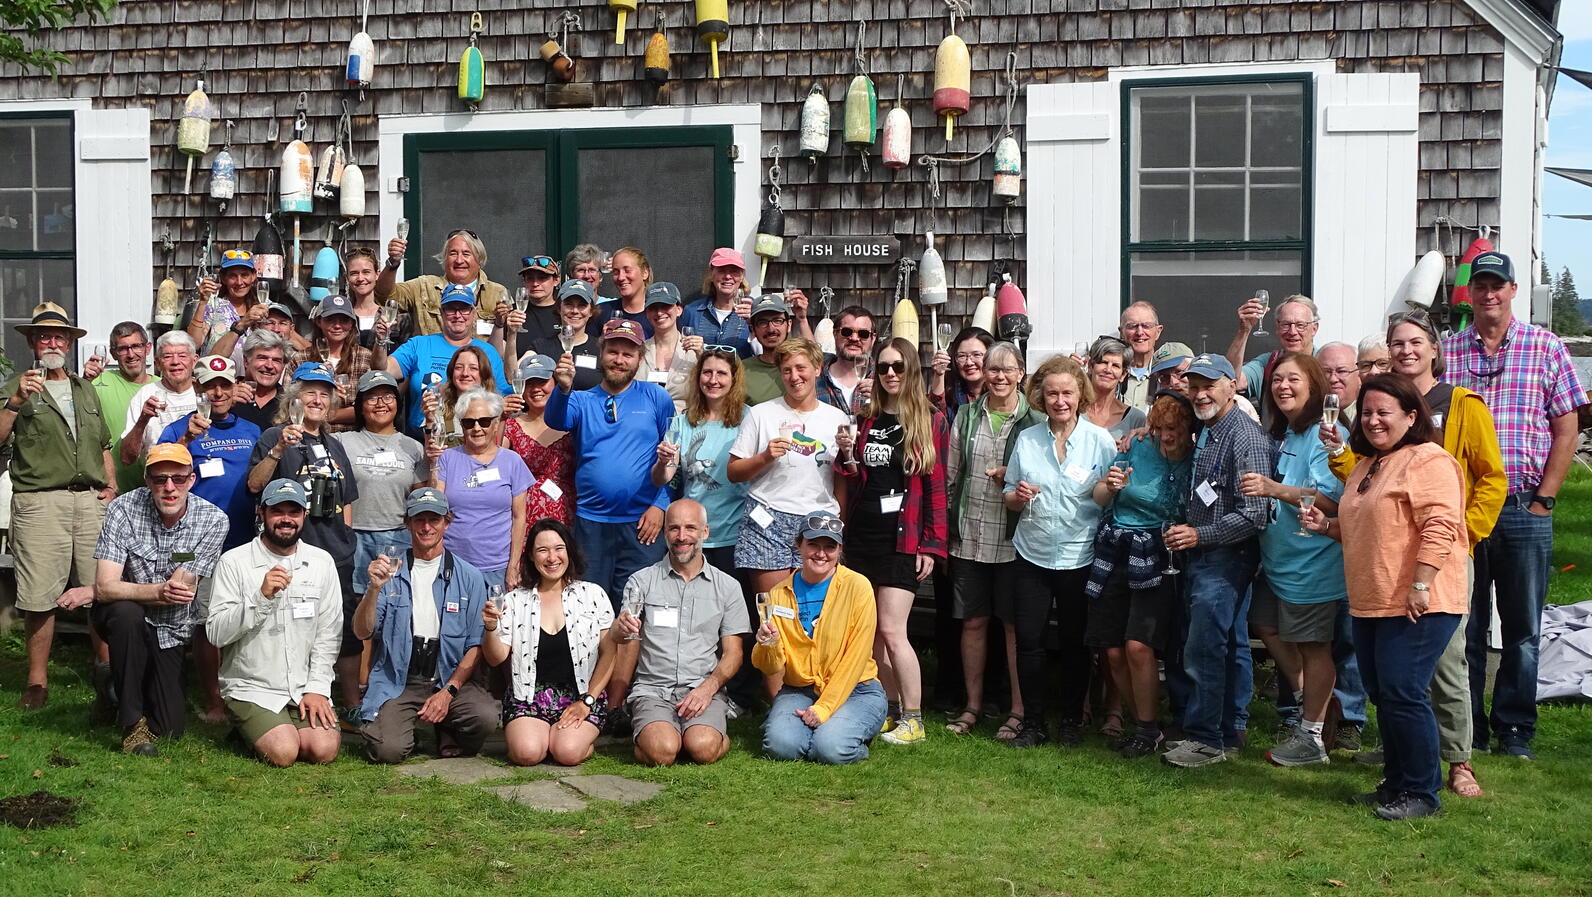 Cheers to 50 Years - Symposium participants toasting on Hog Island